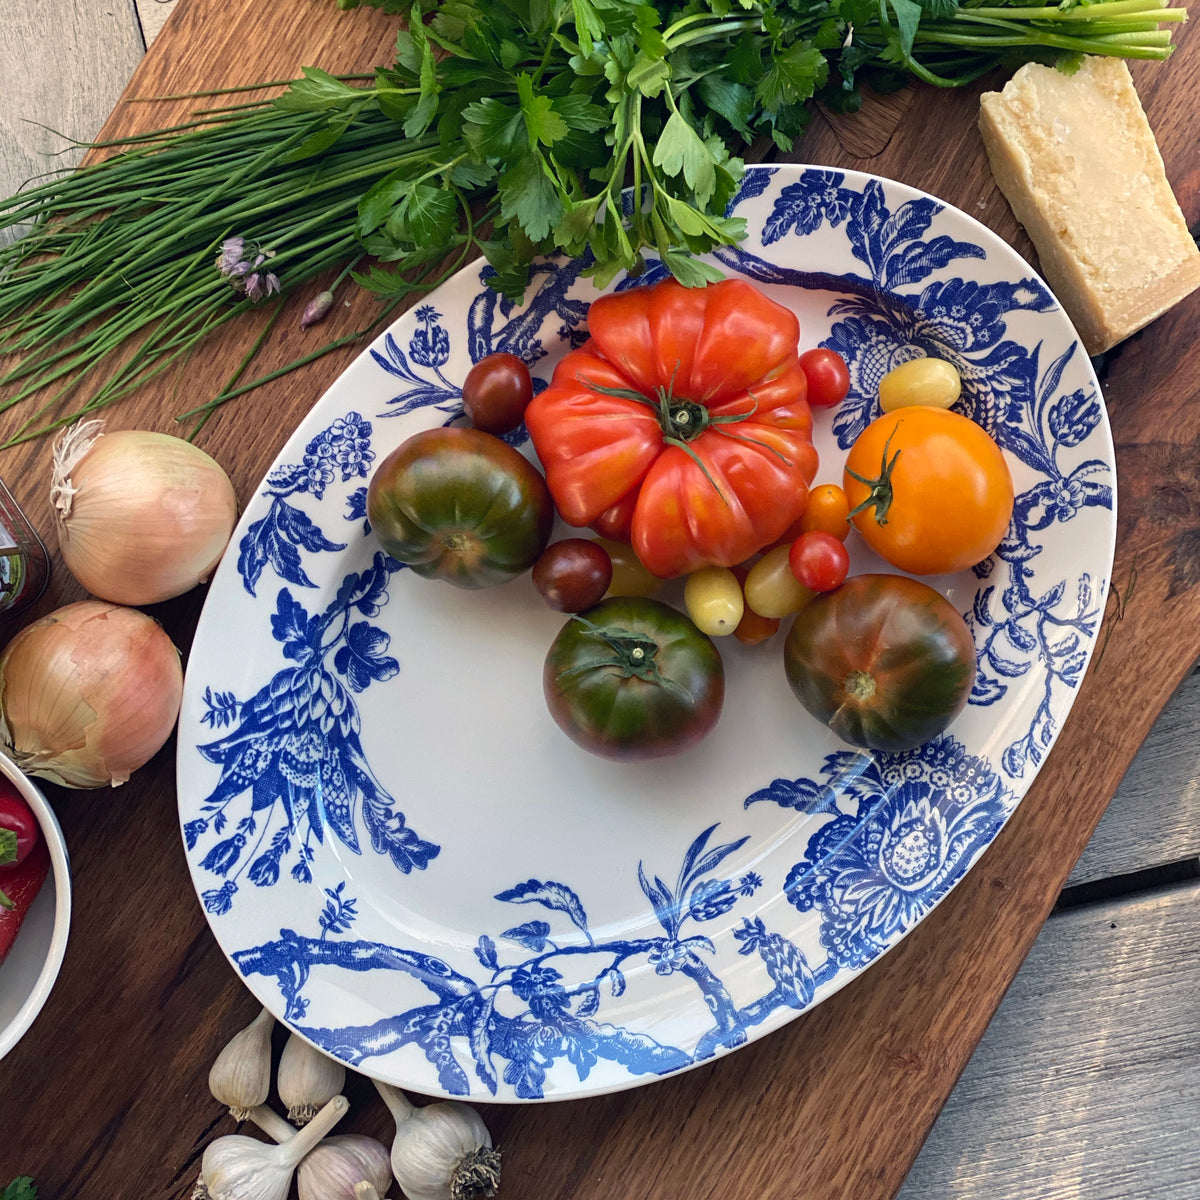 The Arcadia Large Oval Rimmed Platter by Caskata is displayed holding heirloom tomatoes on a cutting board surrounded by fresh vegetables.